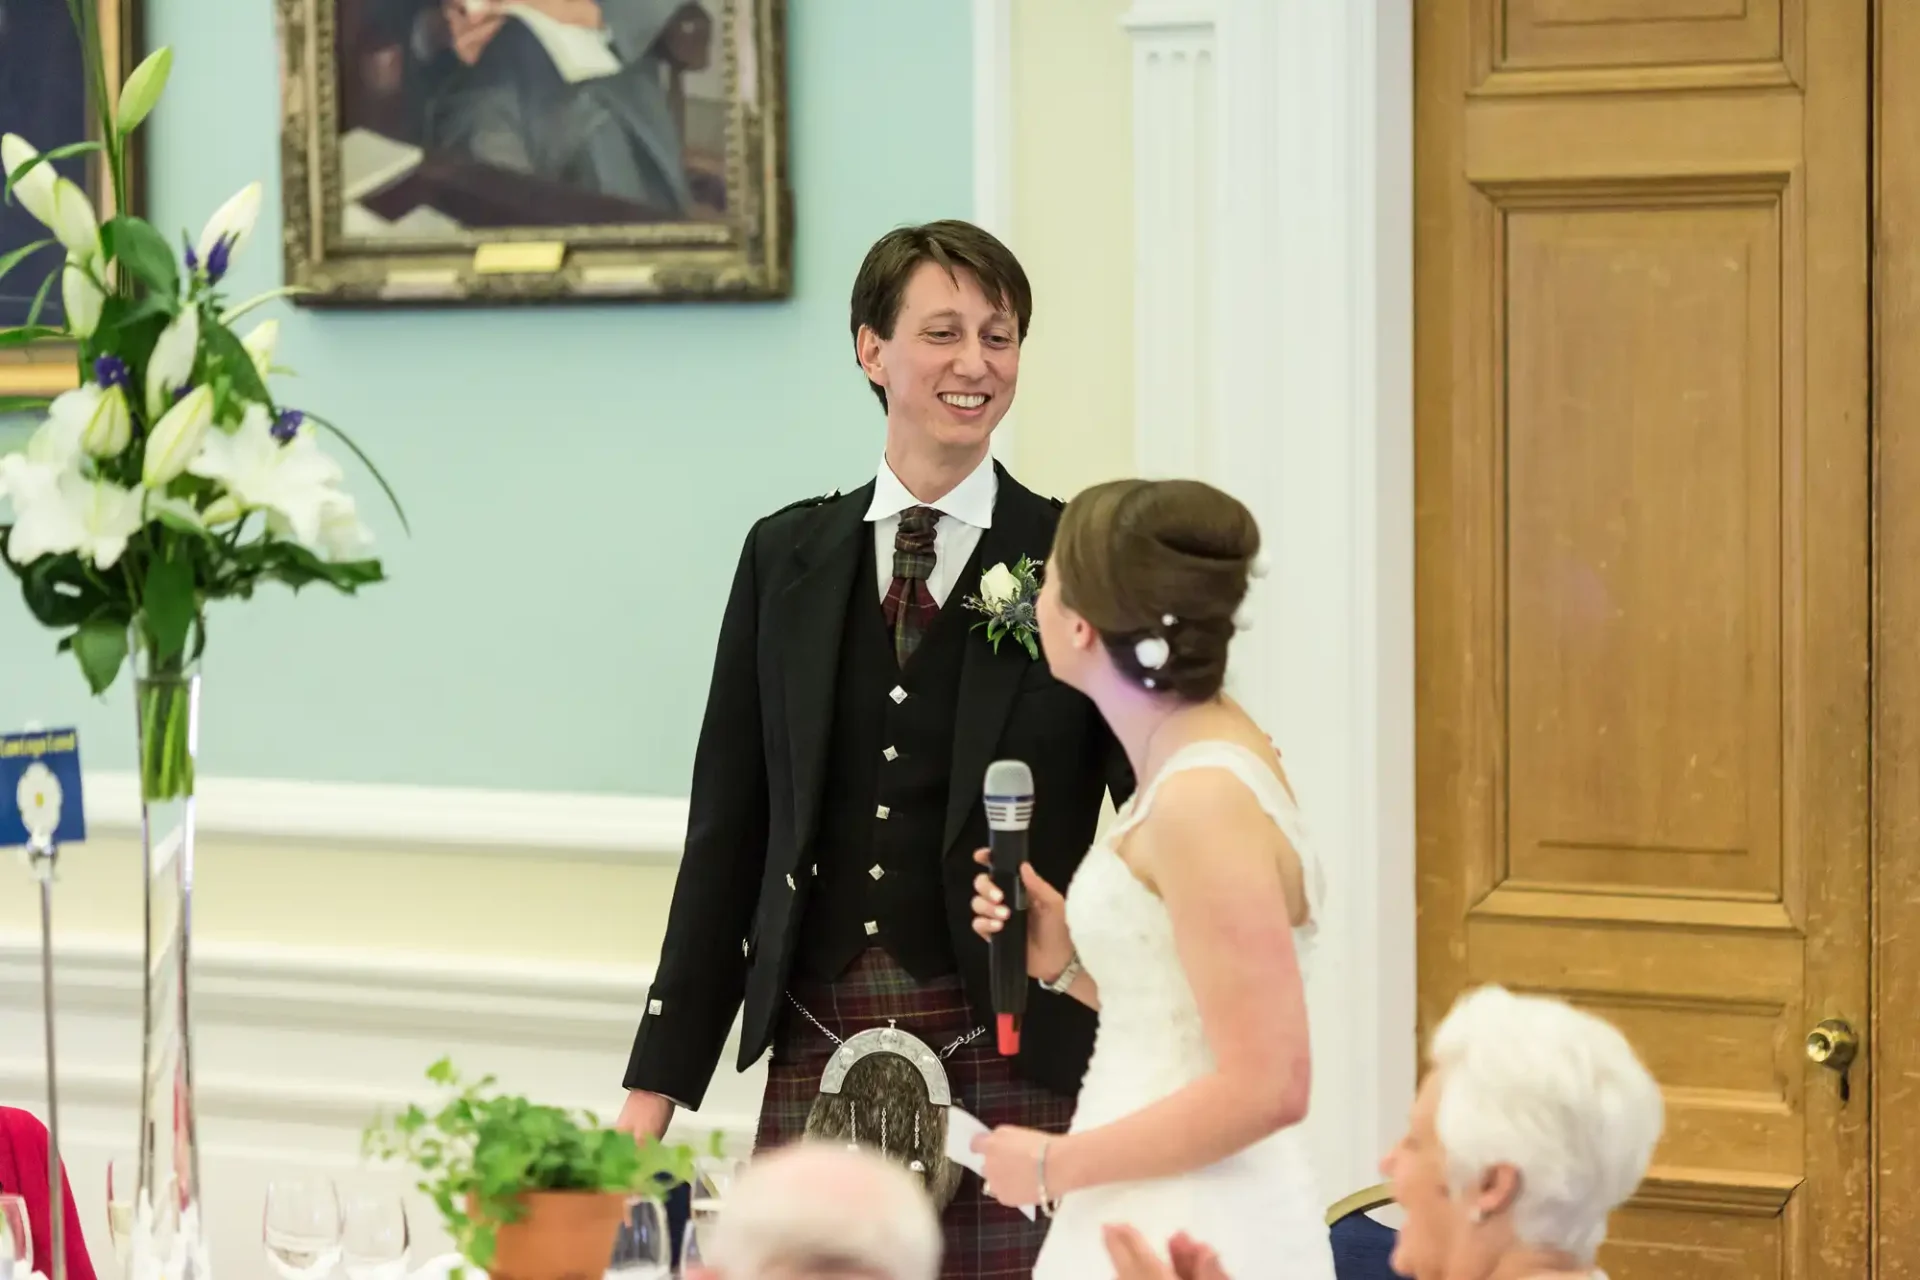 A person in a kilt and jacket smiling at a bride speaking into a microphone at a wedding reception.